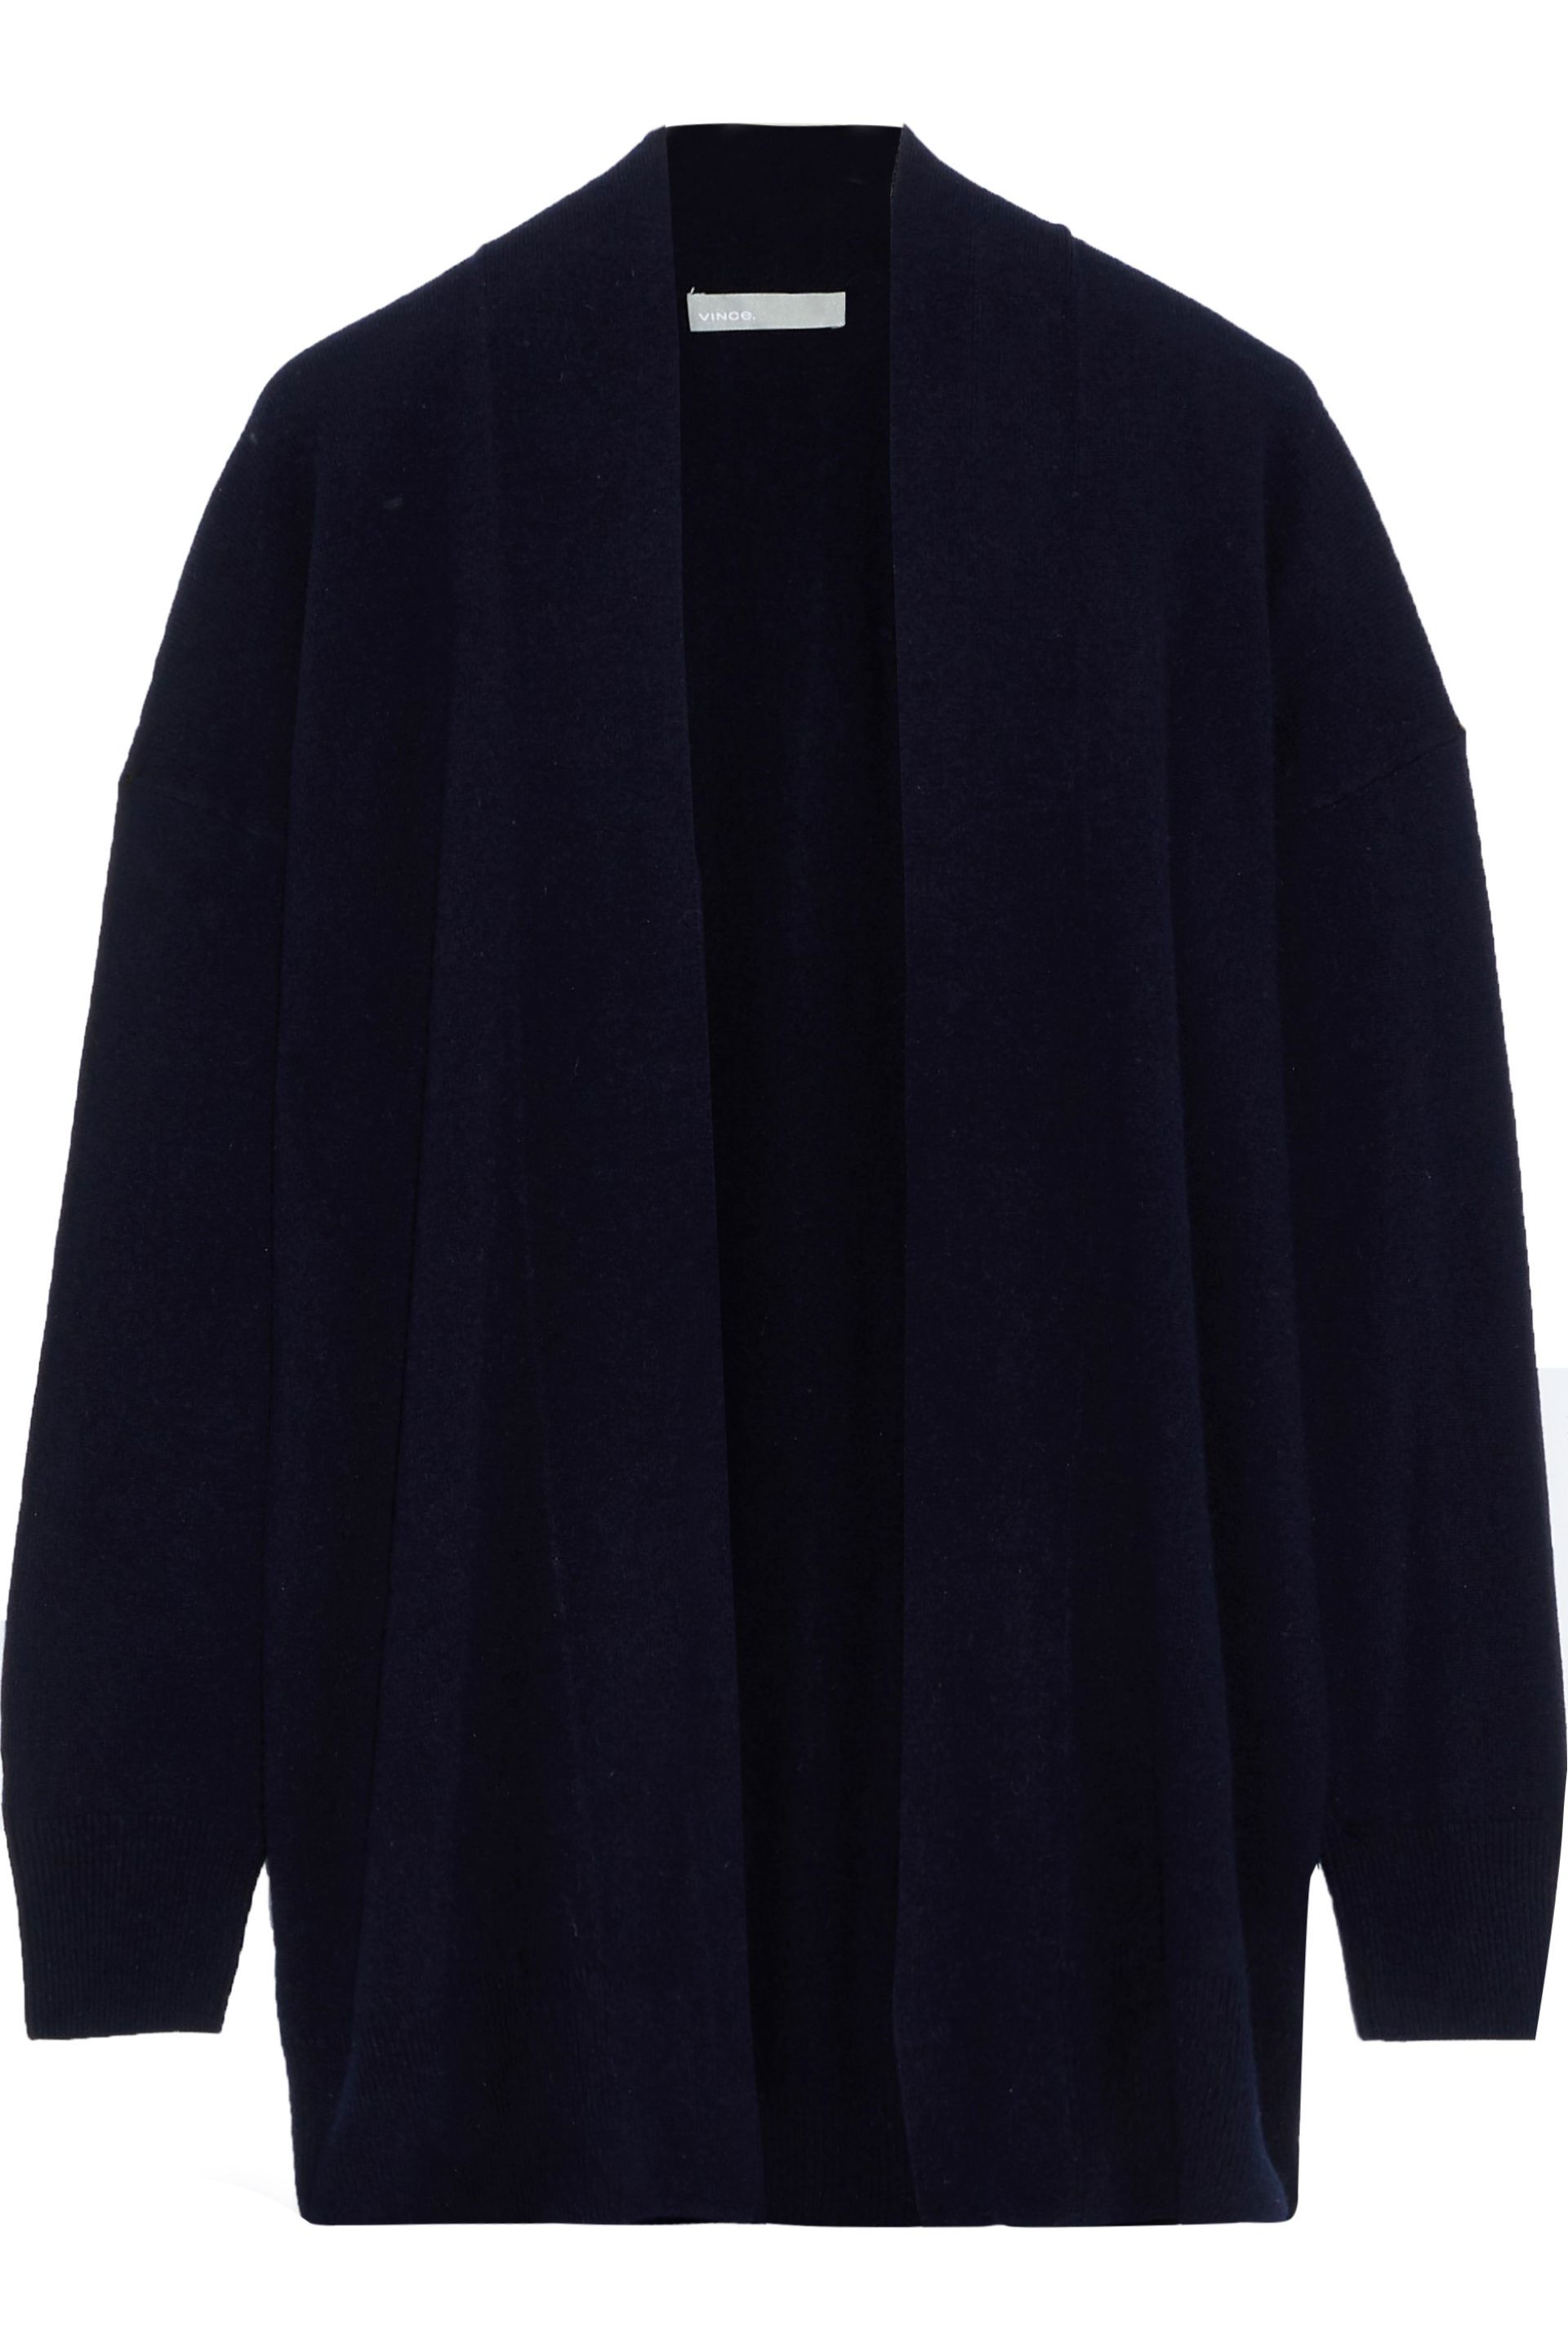 Women's Designer Knitwear | Sale Up To 70% Off At THE OUTNET